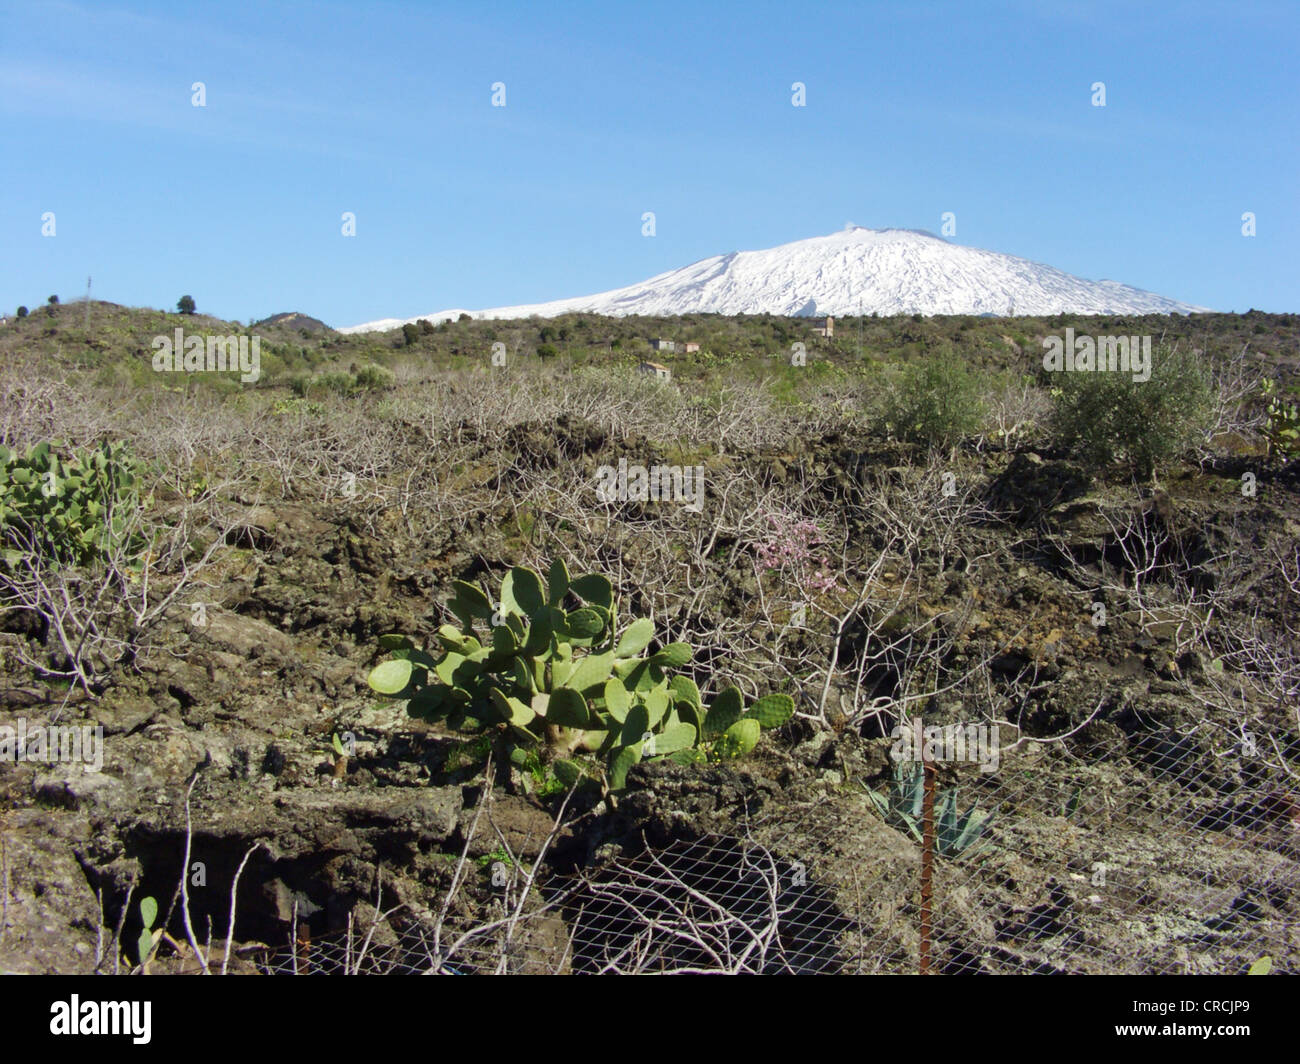 Indian fig, cactus pear (Opuntia ficus-indica, Opuntia ficus-barbarica), on fallow land with the snow covered Mount Etna in the background, Italy, Sicilia Stock Photo